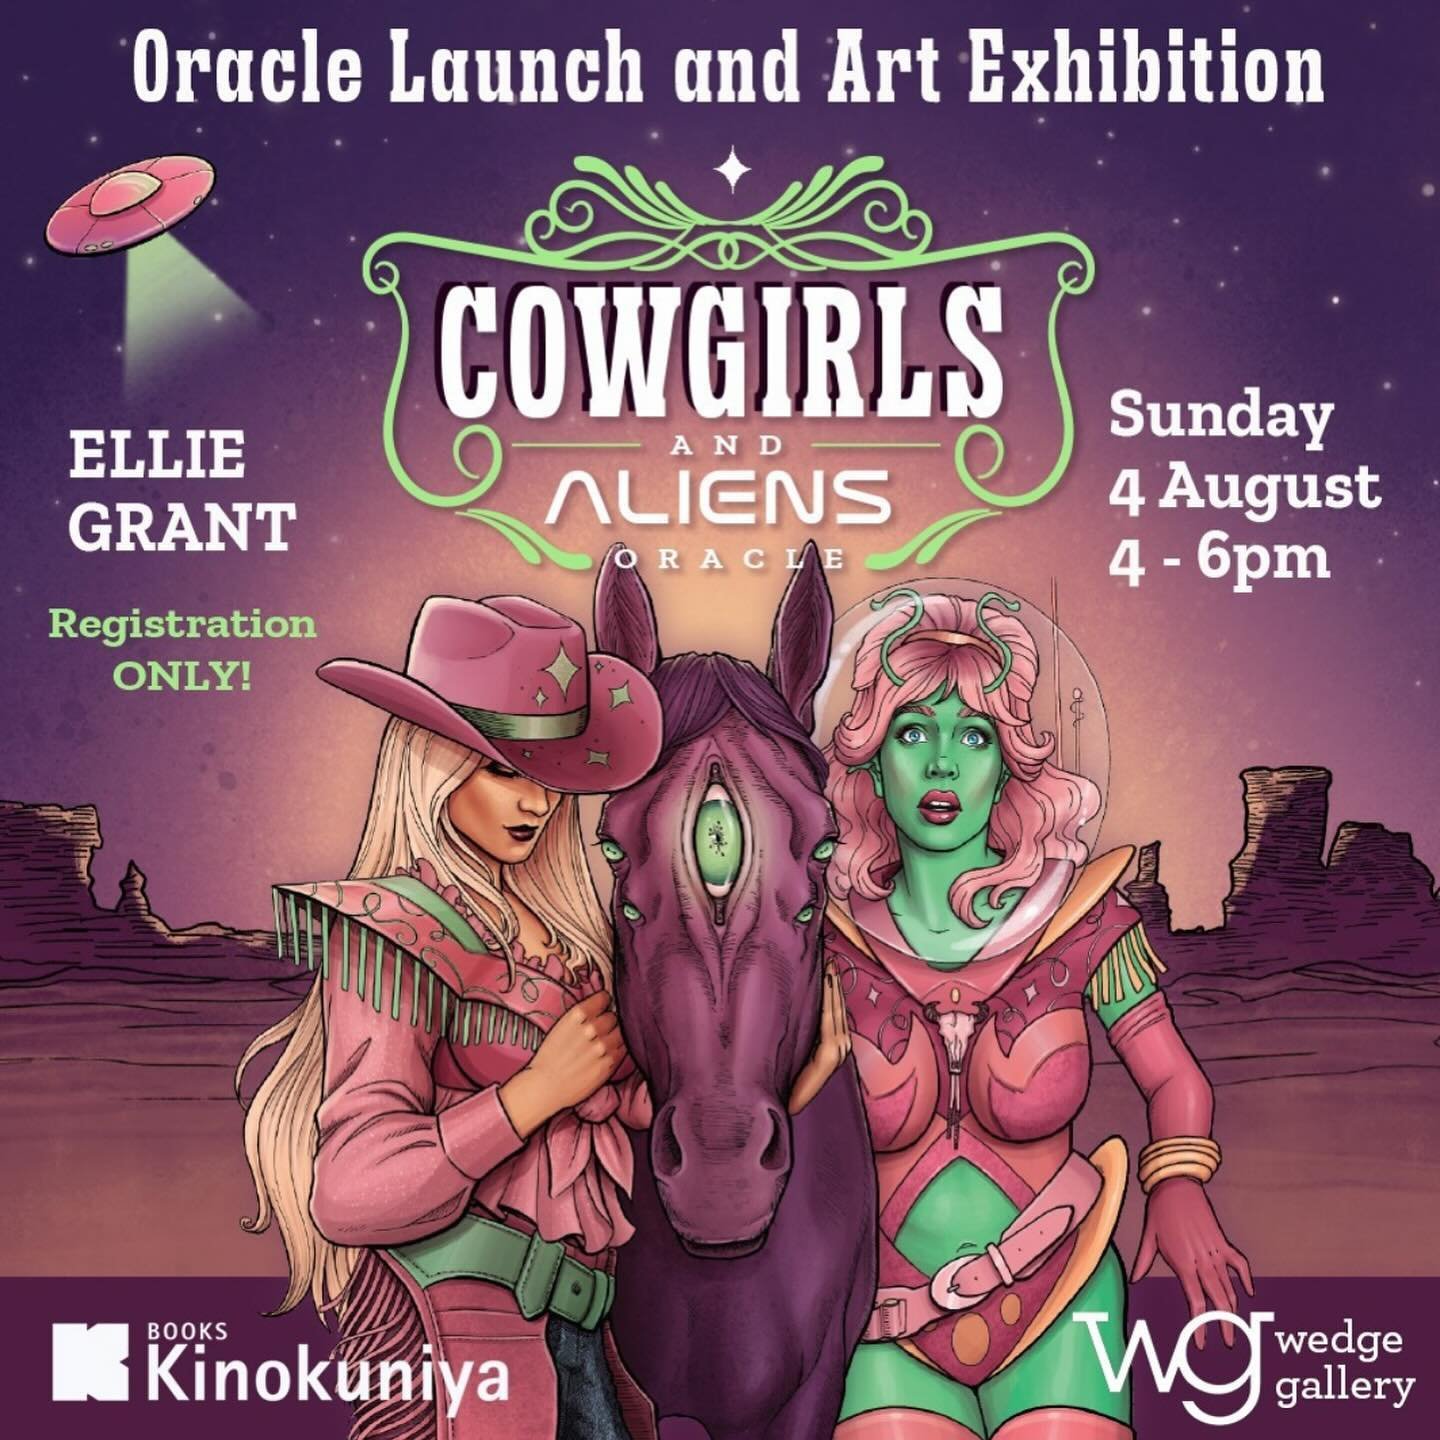 Come and celebrate the launch of my Cowgirls and Aliens oracle deck and see some original artworks! 😍✨ I&rsquo;ll be having an exhibition in Wedge gallery and showing some huge oil paintings as well as all of the ink drawings from creating the oracl